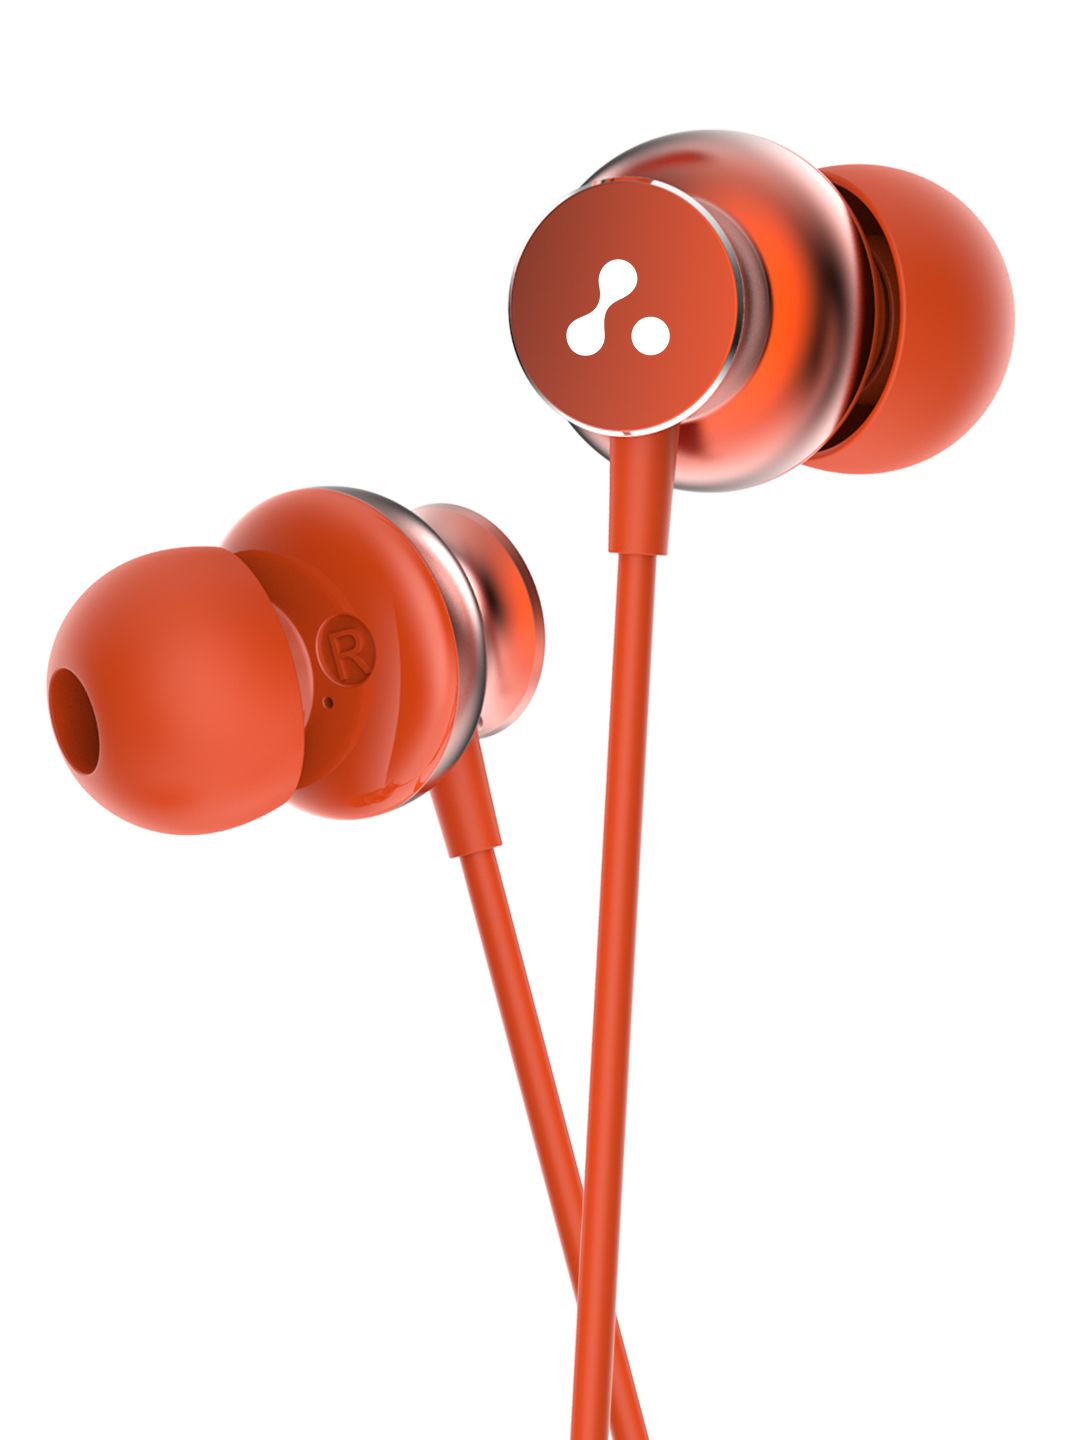 Ambrane Stringz 38 Wired Earphones with Mic & Powerful HD Sound with High Bass - Orange Price in India